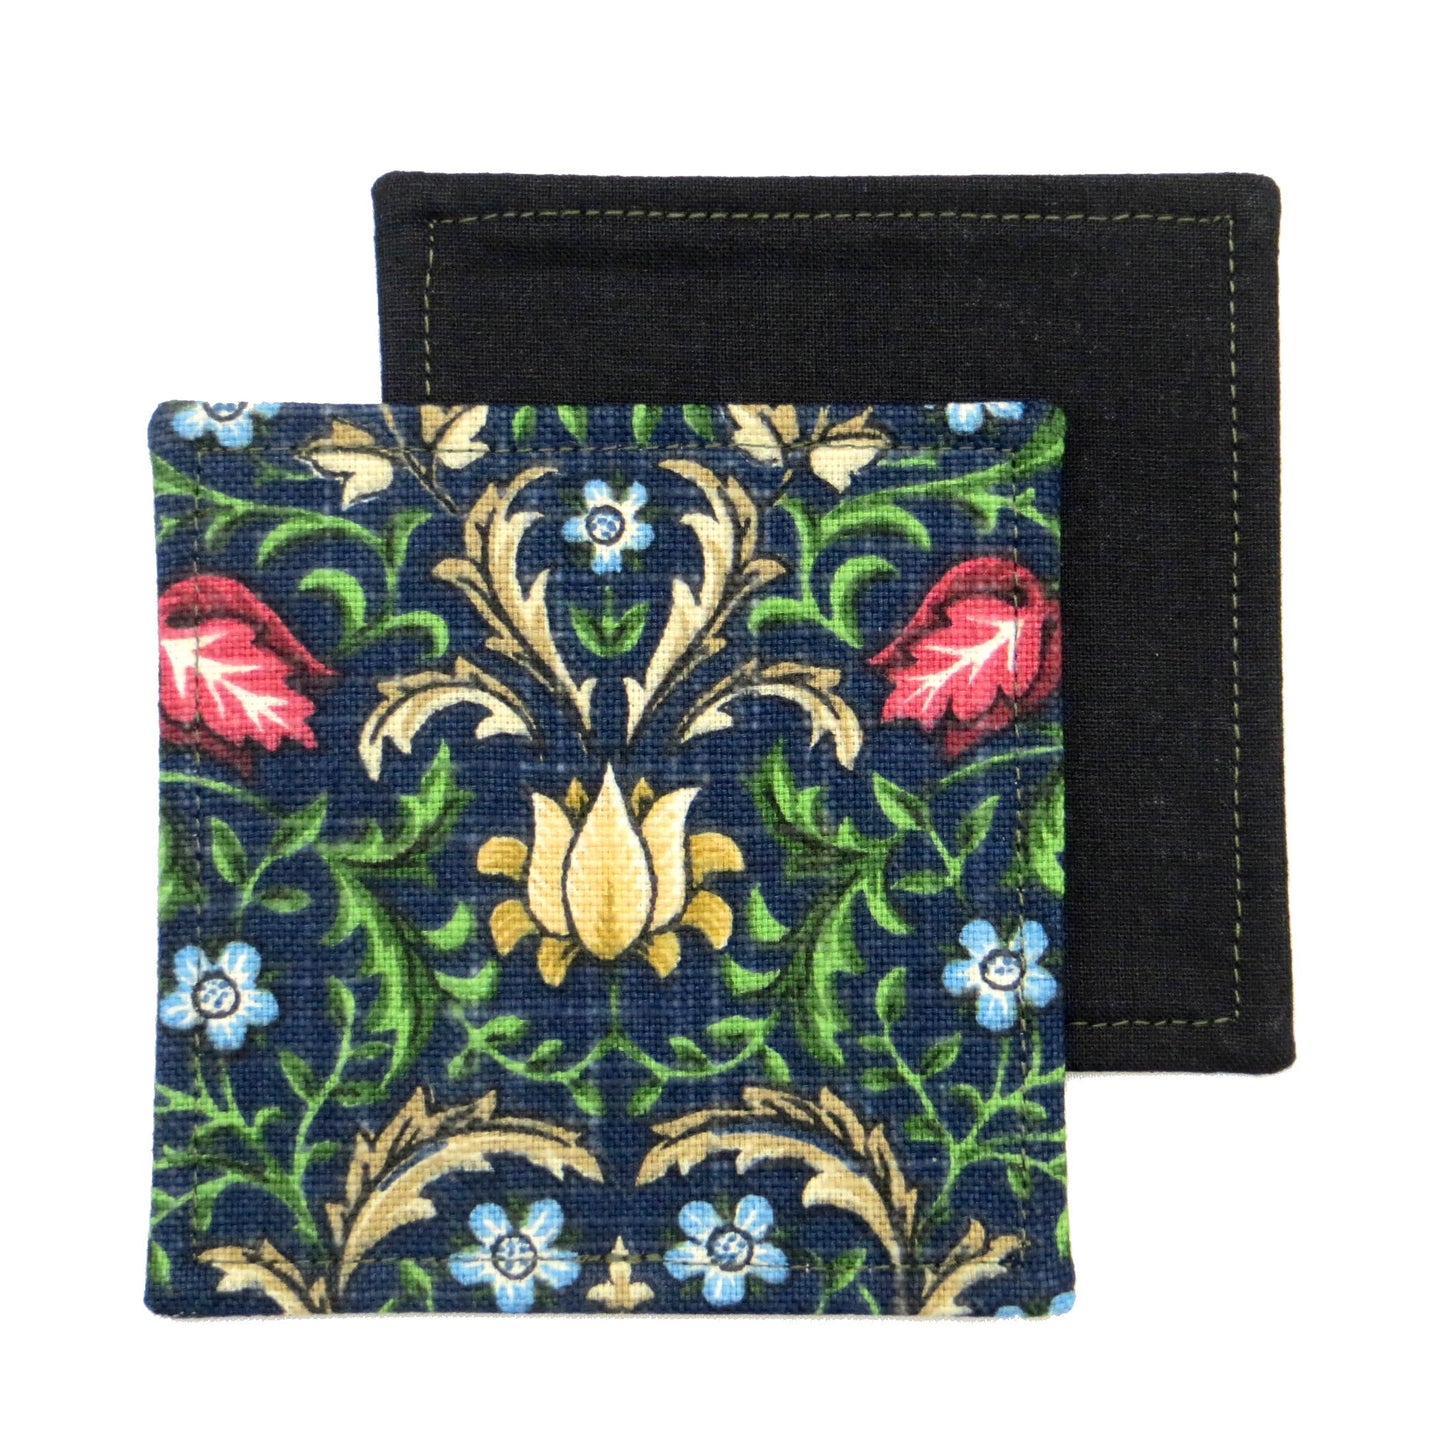 Square coasters with yellow, red, and blue flowers with green vines on blue background